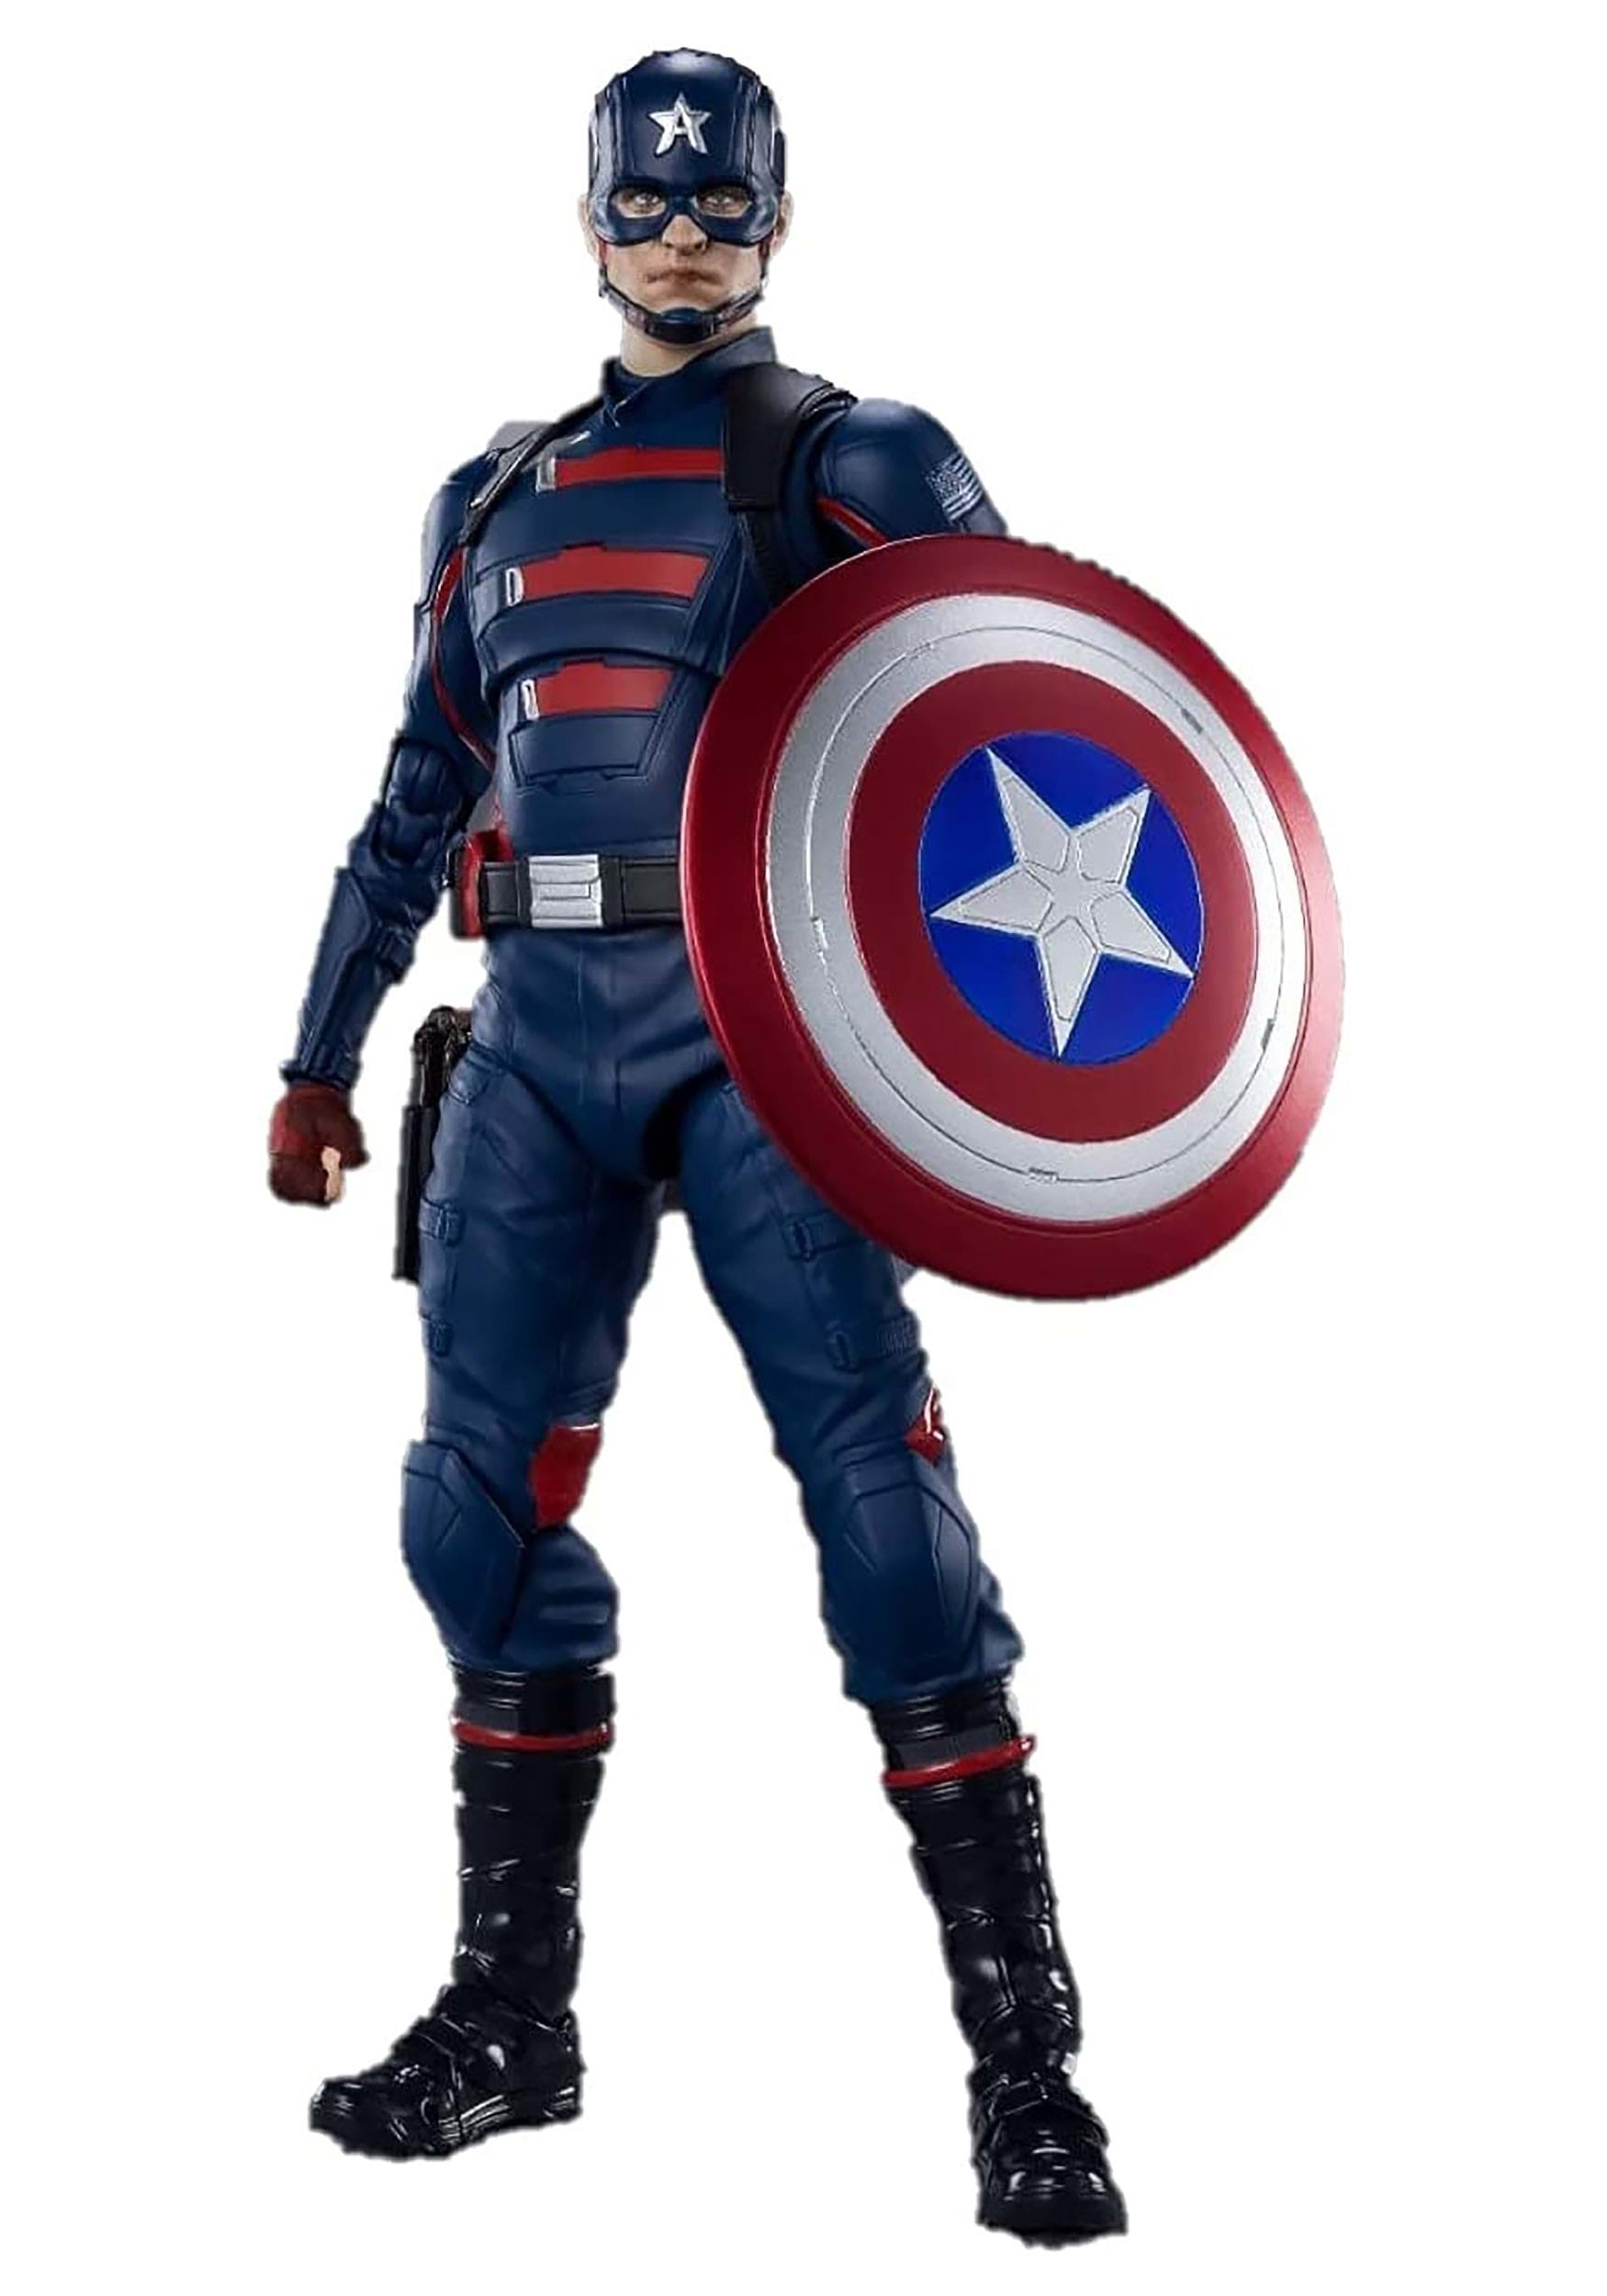 Bandai Spirits Falcon and the Winter Soldier Captain Figure